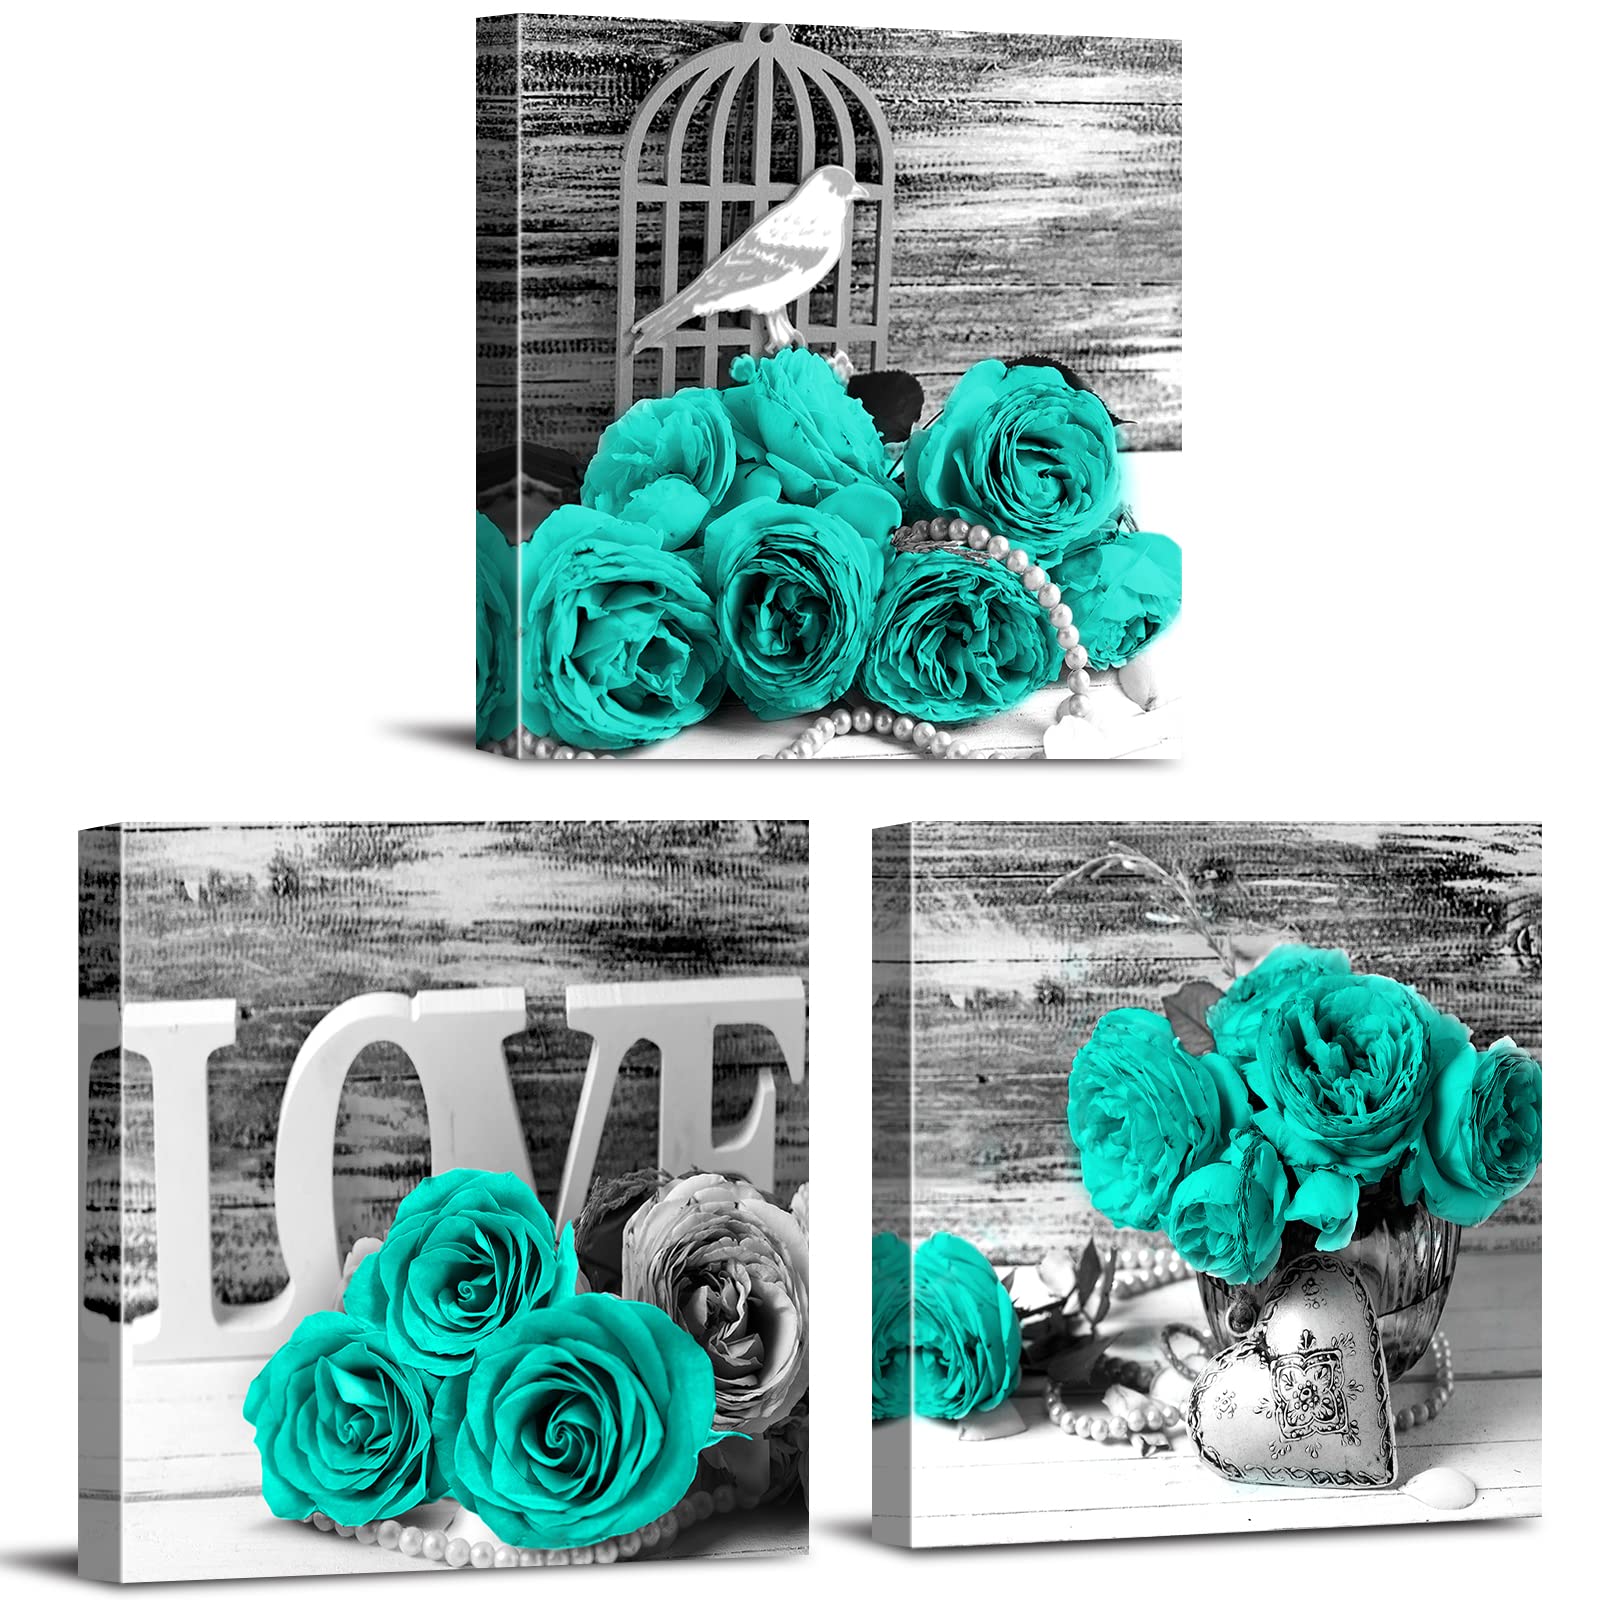 Teal Rose Wall Art Master Bedroom Decor for Couples Turquoise Flower Canvas Prints Paintings Bathroom Living Room Home Decorations 16x16" 3Pcs ...